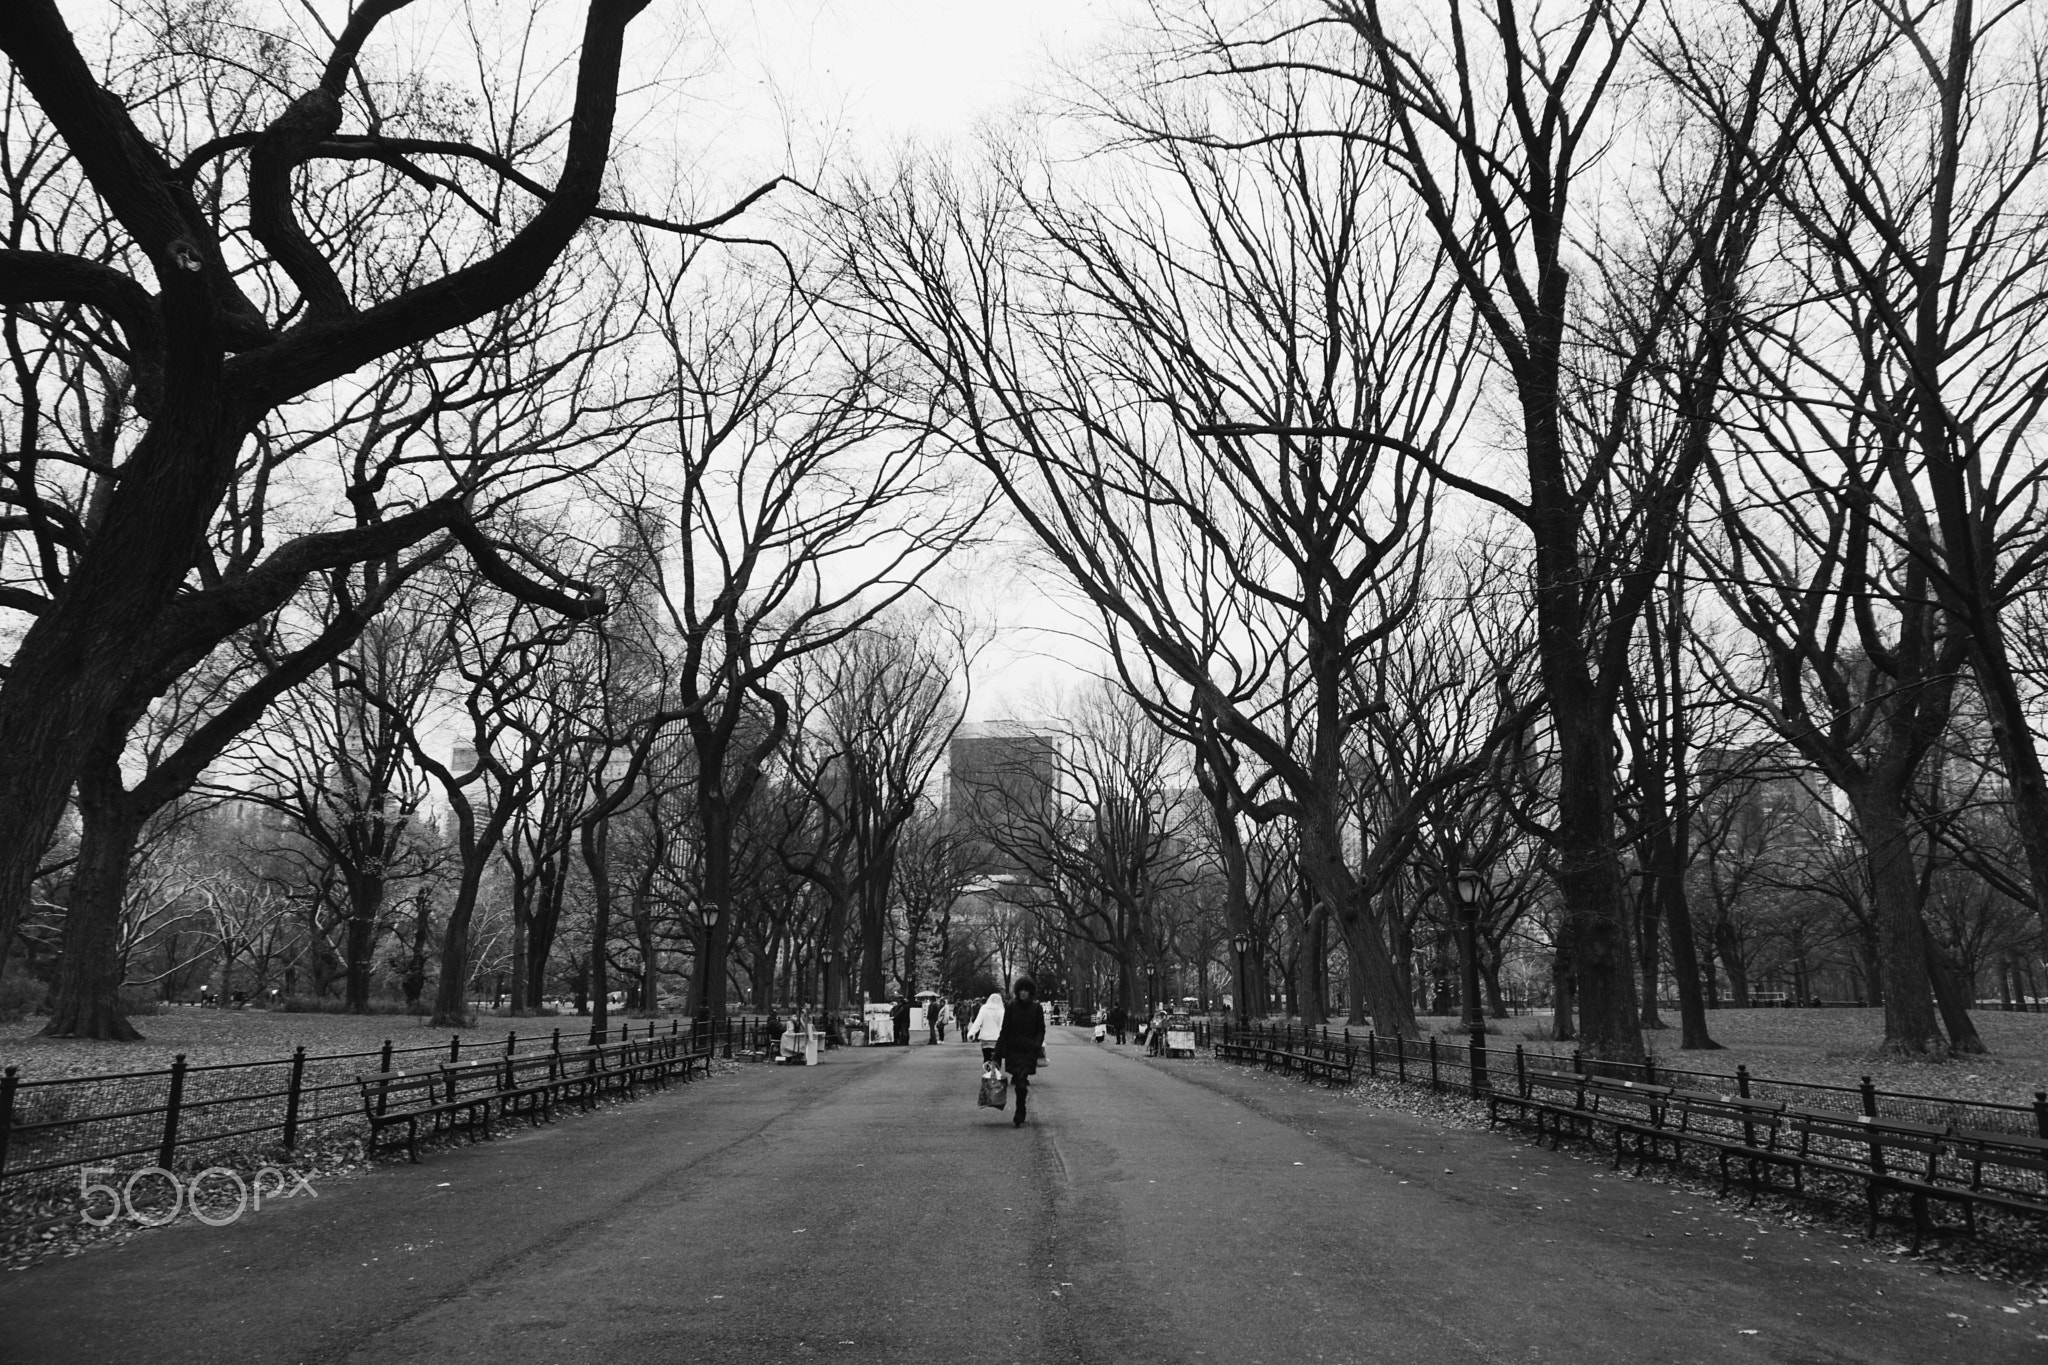 Woman Walking in Central Park, New York City, NY